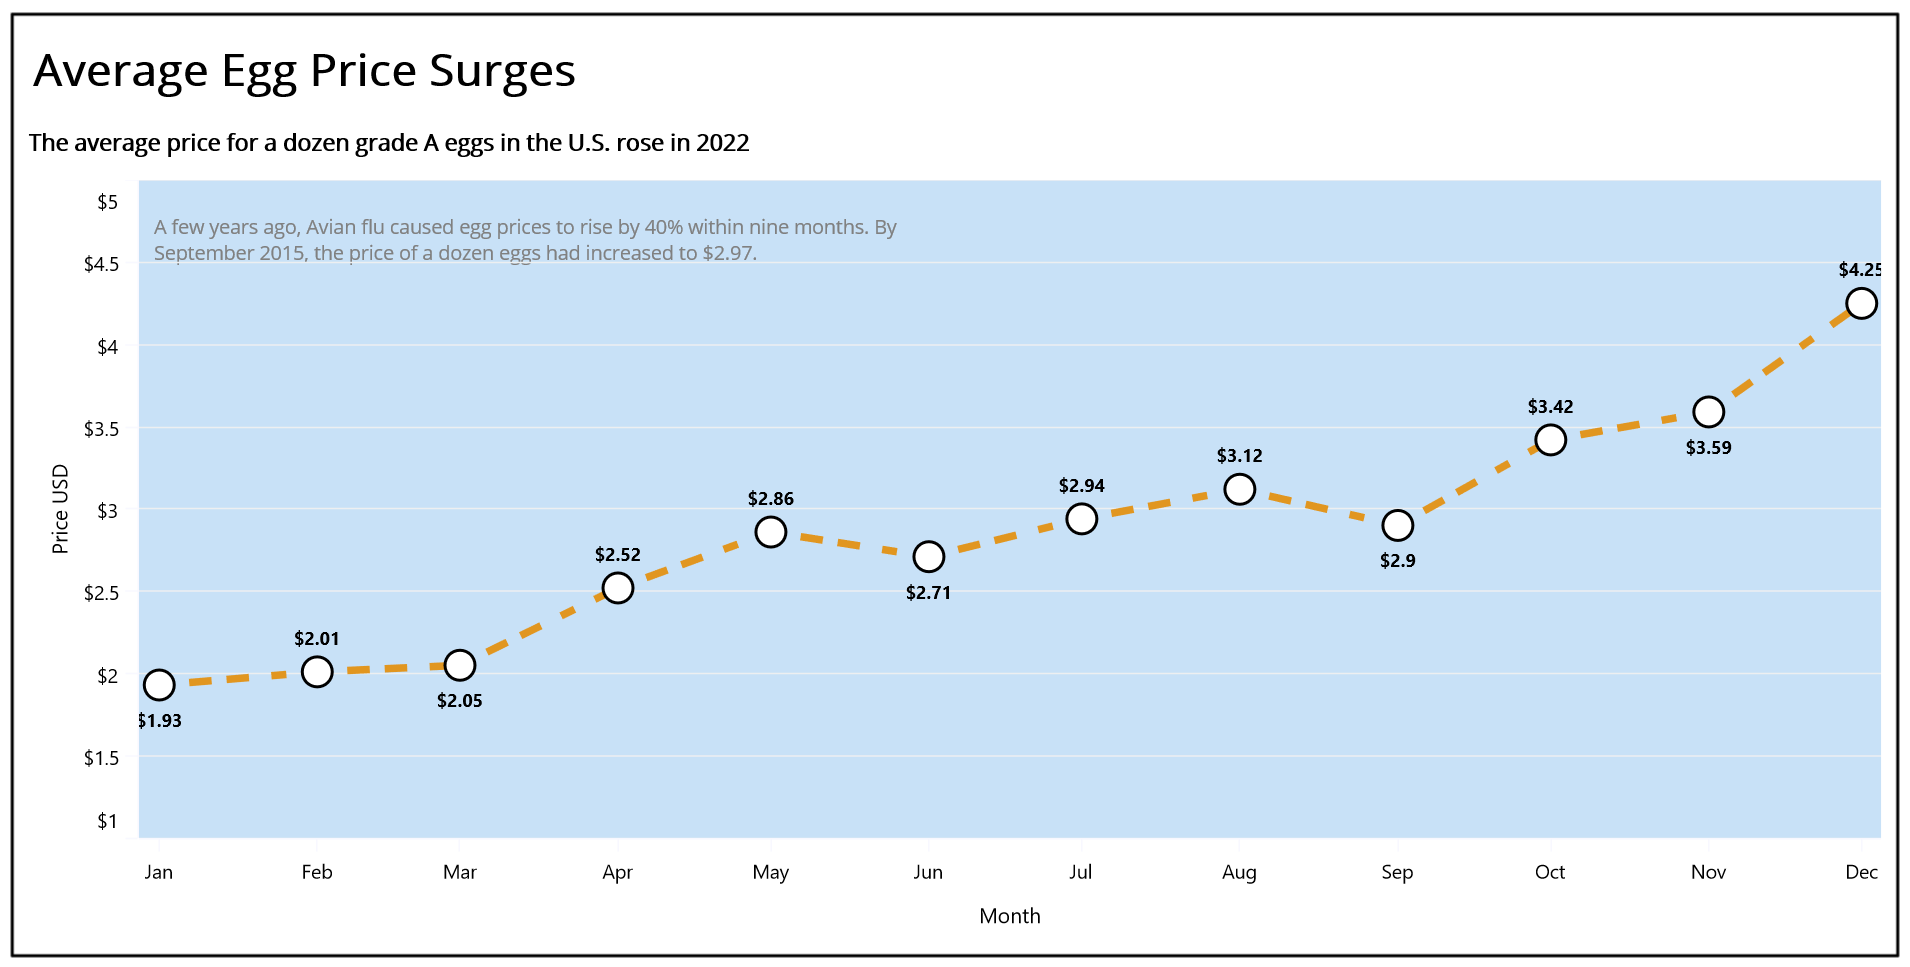 Syncfusion .NET MAUI line chart showing the surge in U.S. egg prices in 2022